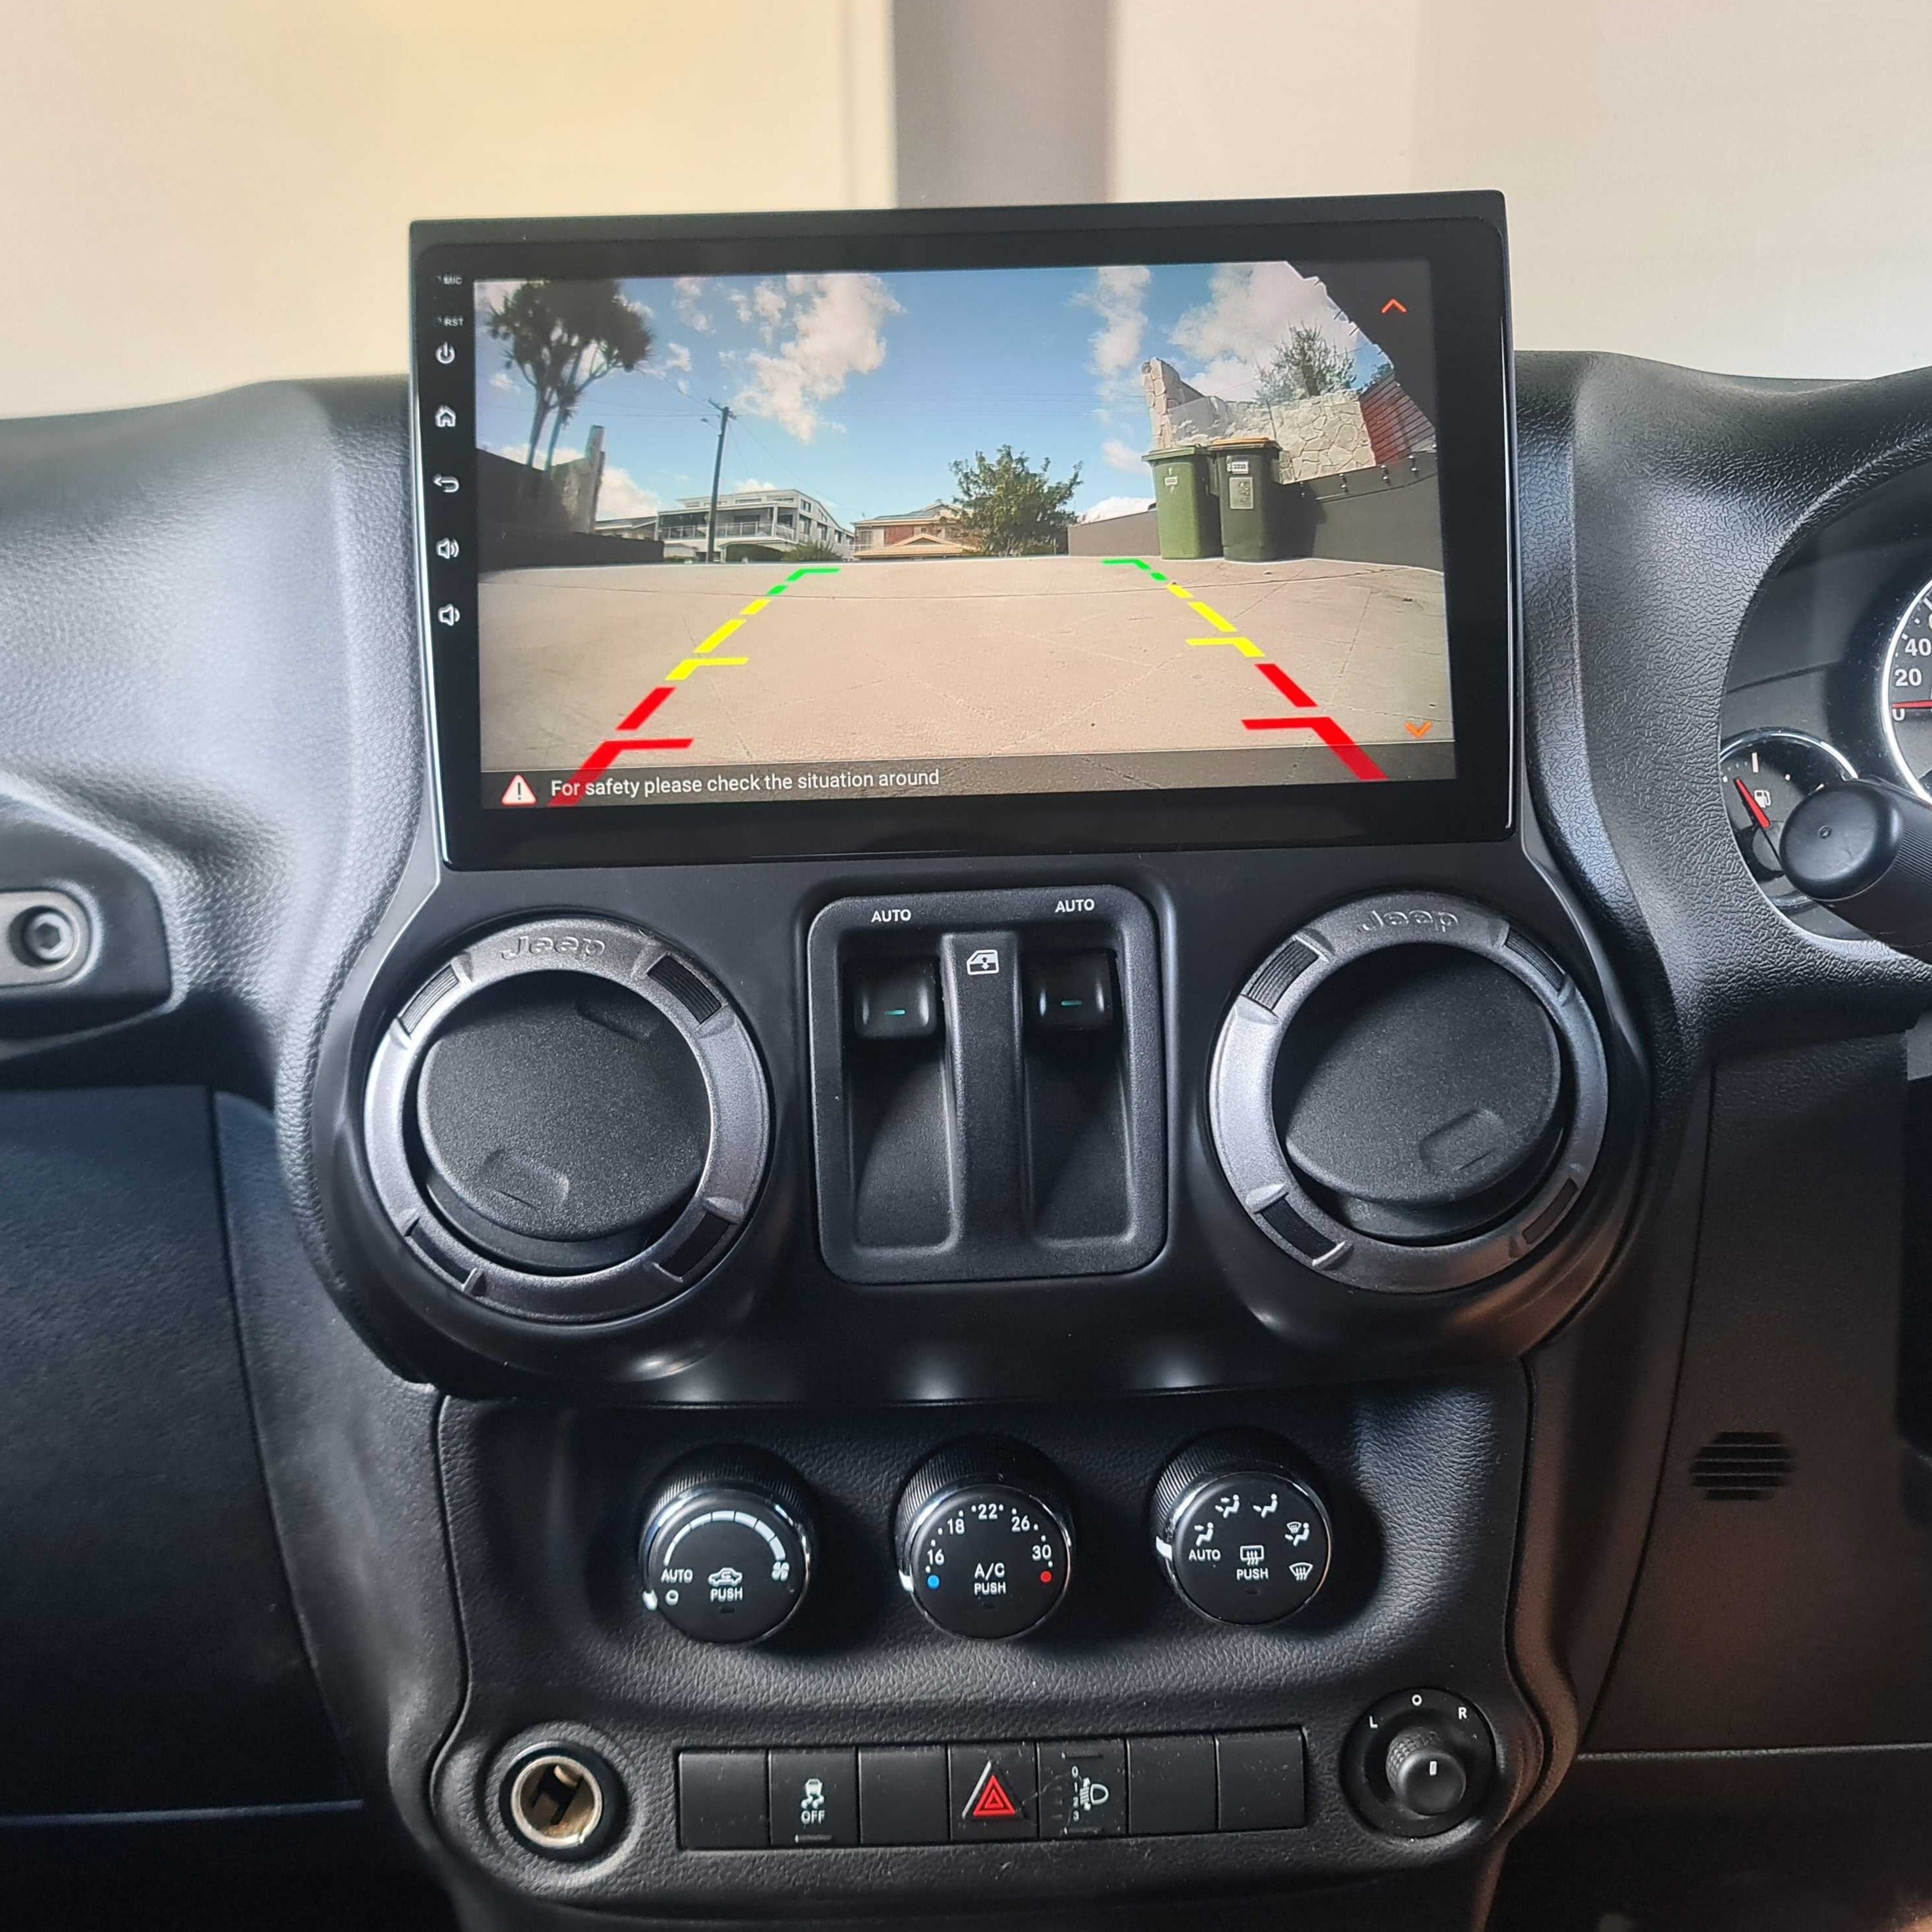 Jeep Wrangler 2007-2014 - Premium Head Unit Upgrade Kit: Radio Infotainment System with Wired & Wireless Apple CarPlay and Android Auto Compatibility - baeumer technologies